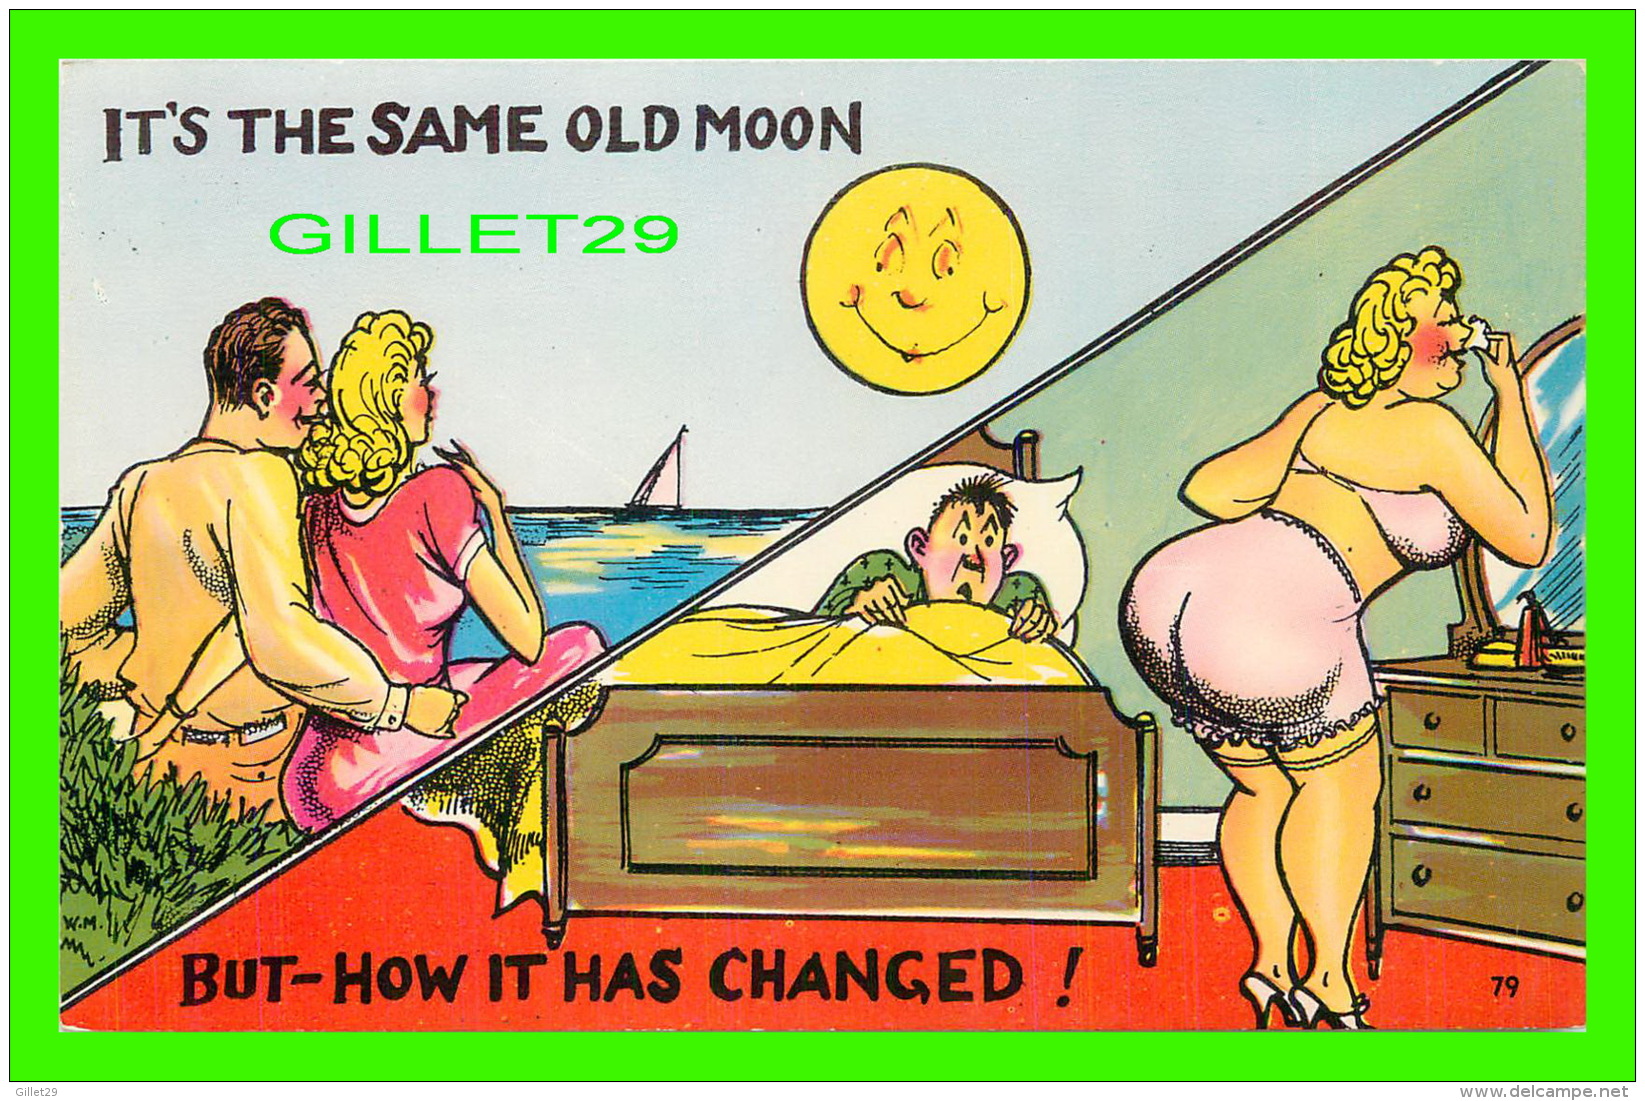 HUMOUR, COMICS - IT'S THE SAME OLS MOON BUT-HOW IT HAS CHANGED - A SHINI COLOR - - Humour